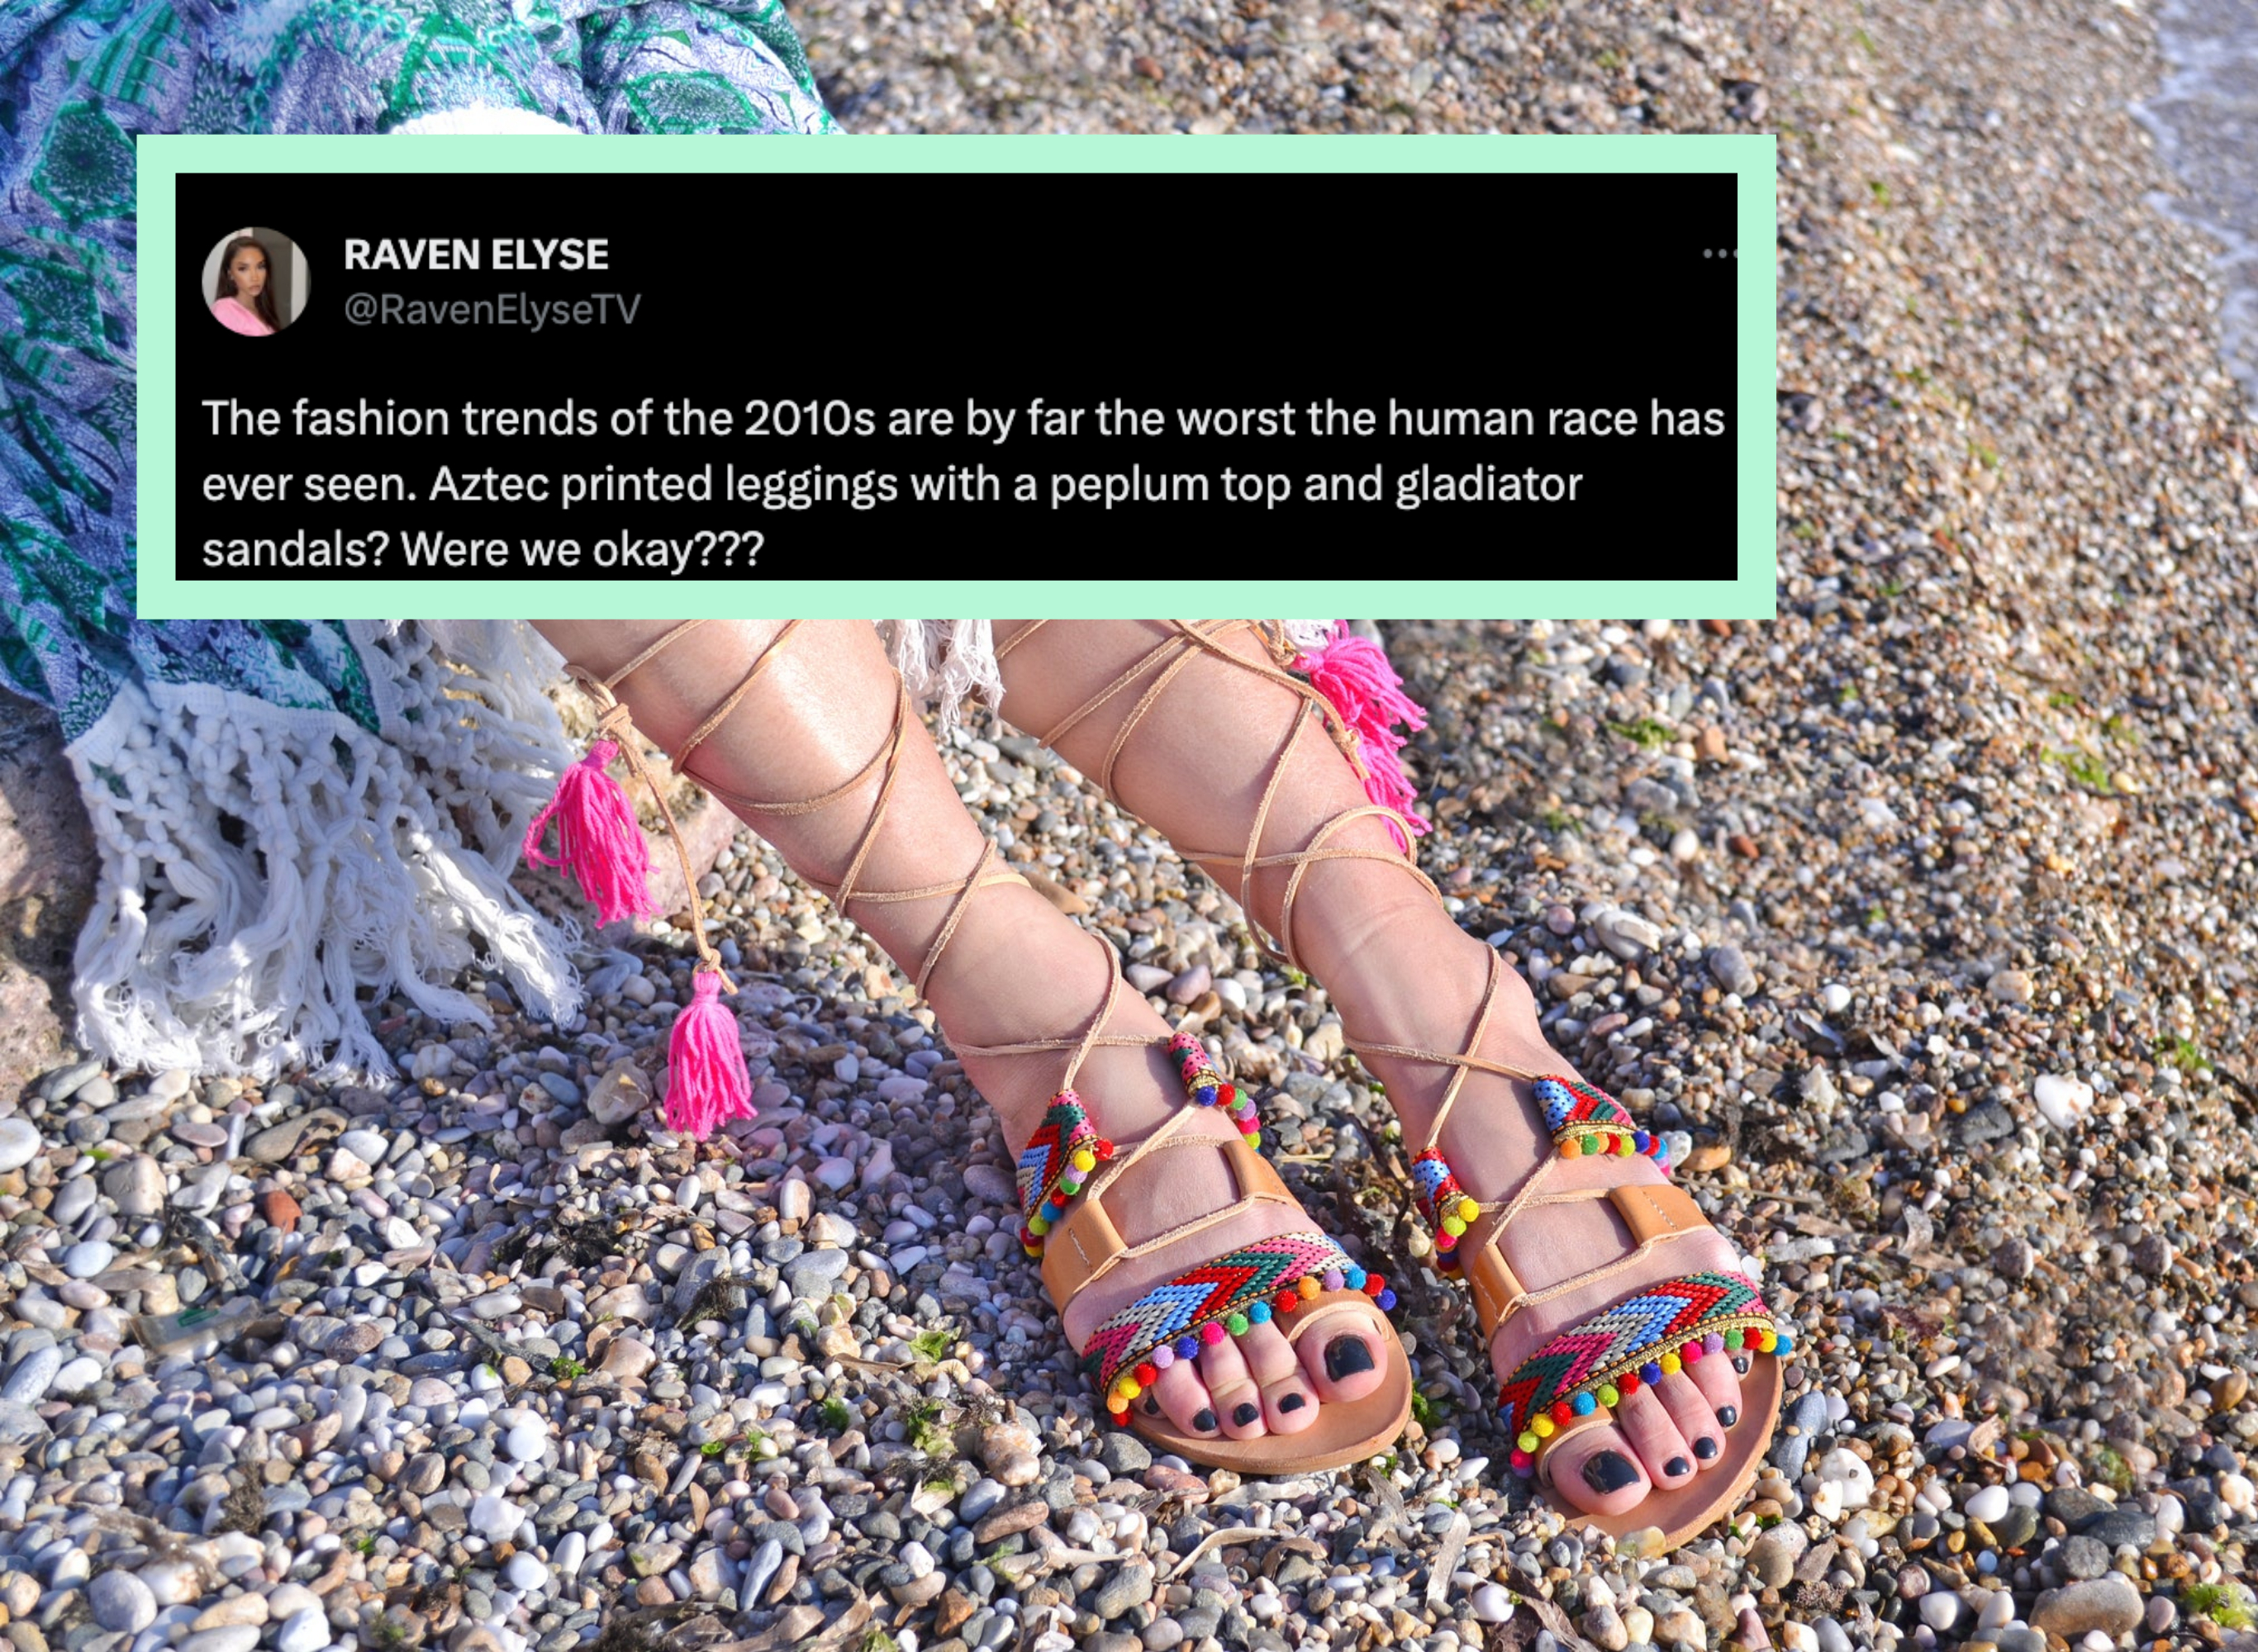 A woman wearing colorful gladiator sandals with tassels on the beach with a tweet overlayed saying the trends of the 2010s were &quot;the worst the human race has ever seen,&quot; with mentions of Aztec-inspired leggings, peplum tops, and gladiator sandals